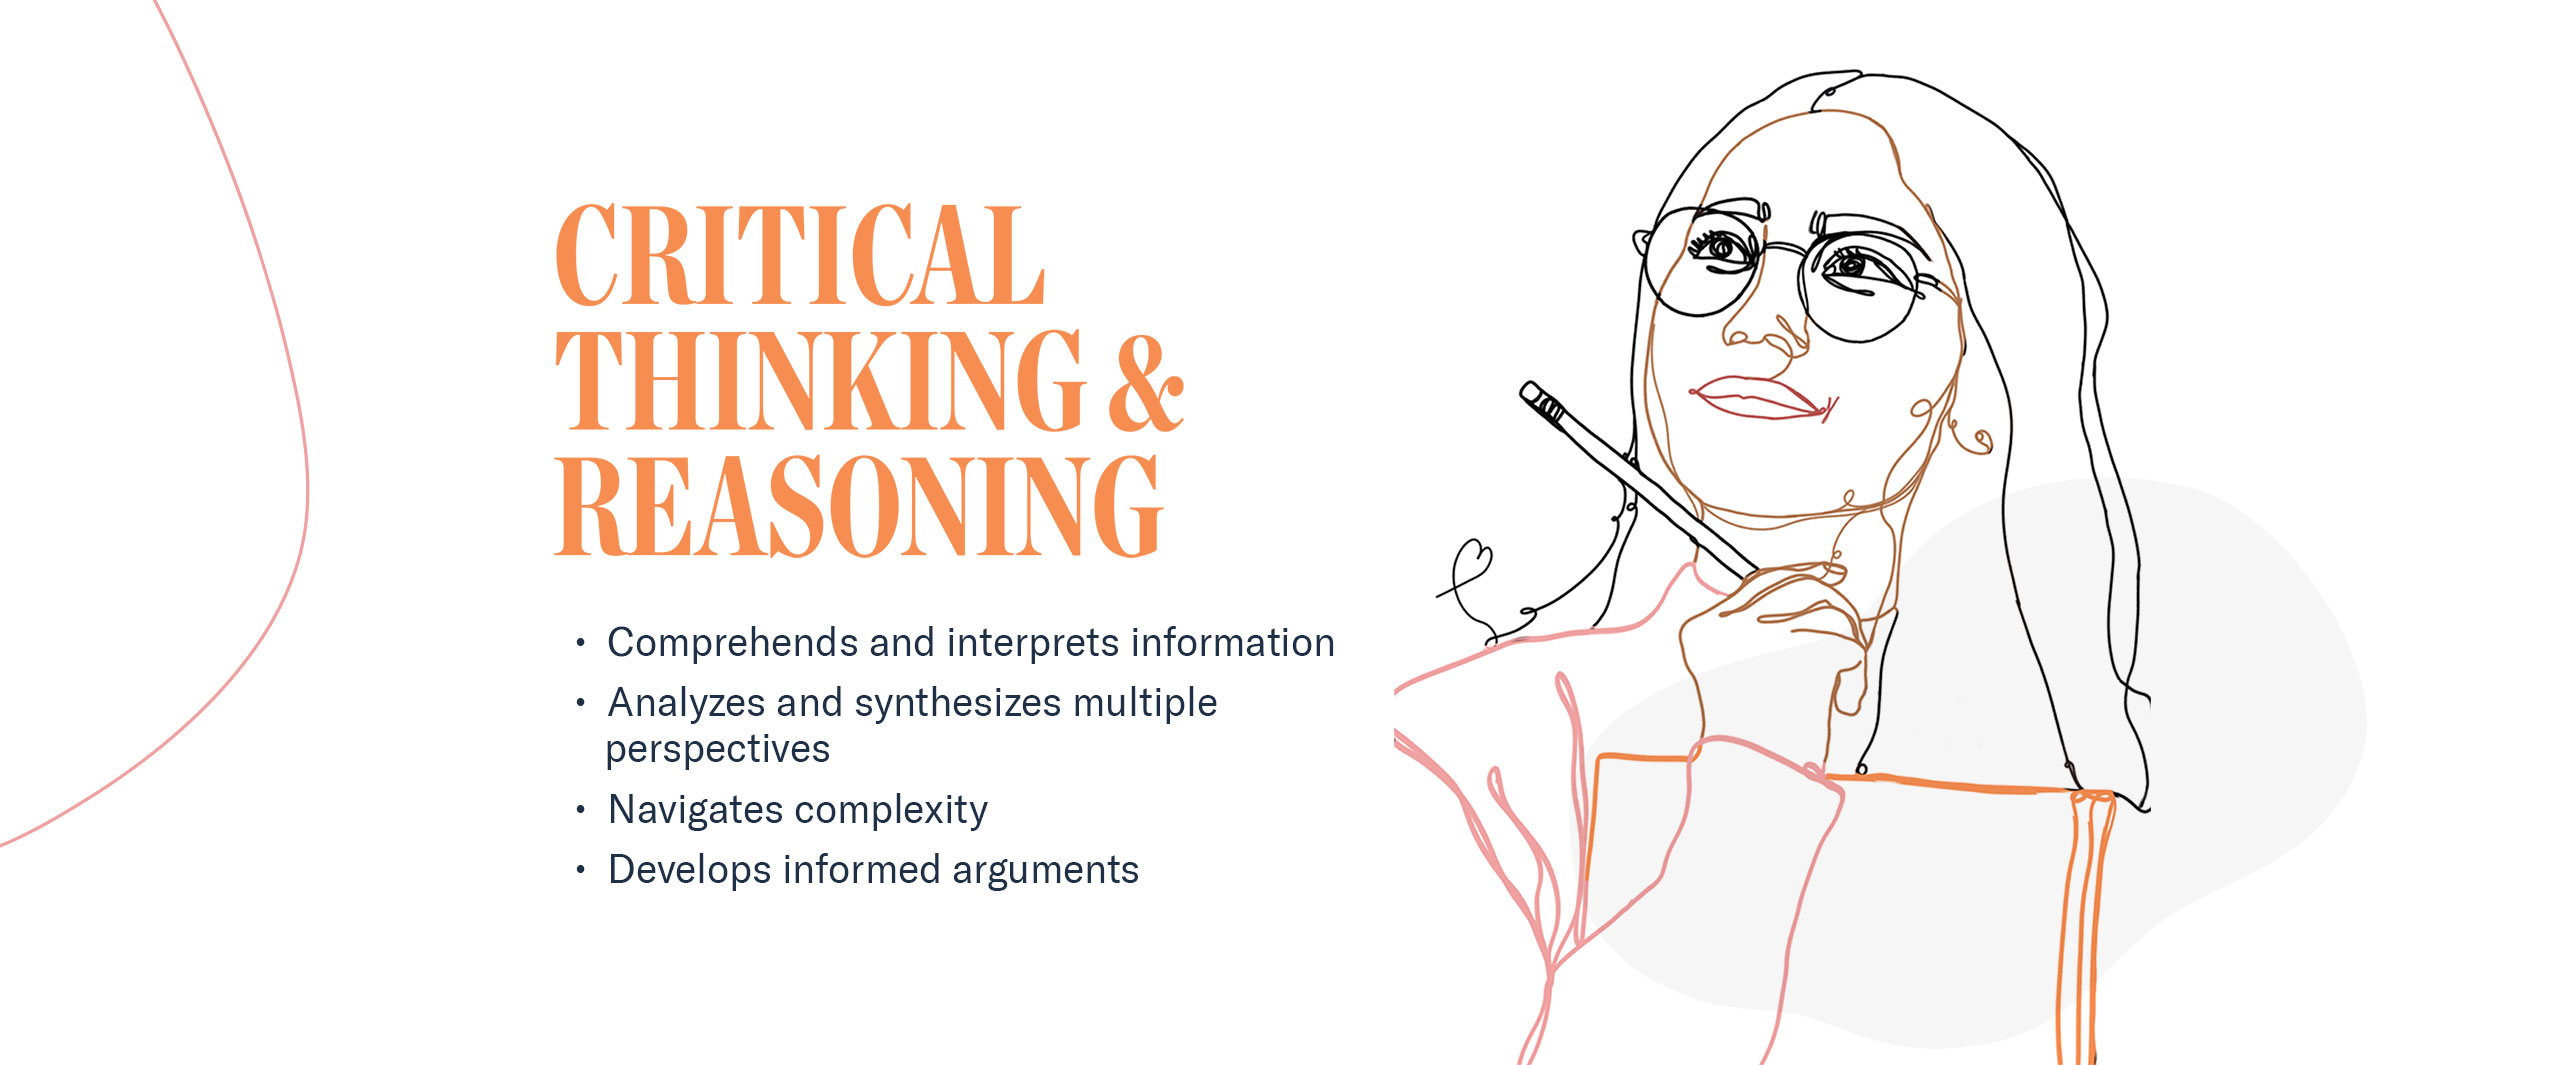 Competency 1: Critical Thinking and Reasoning